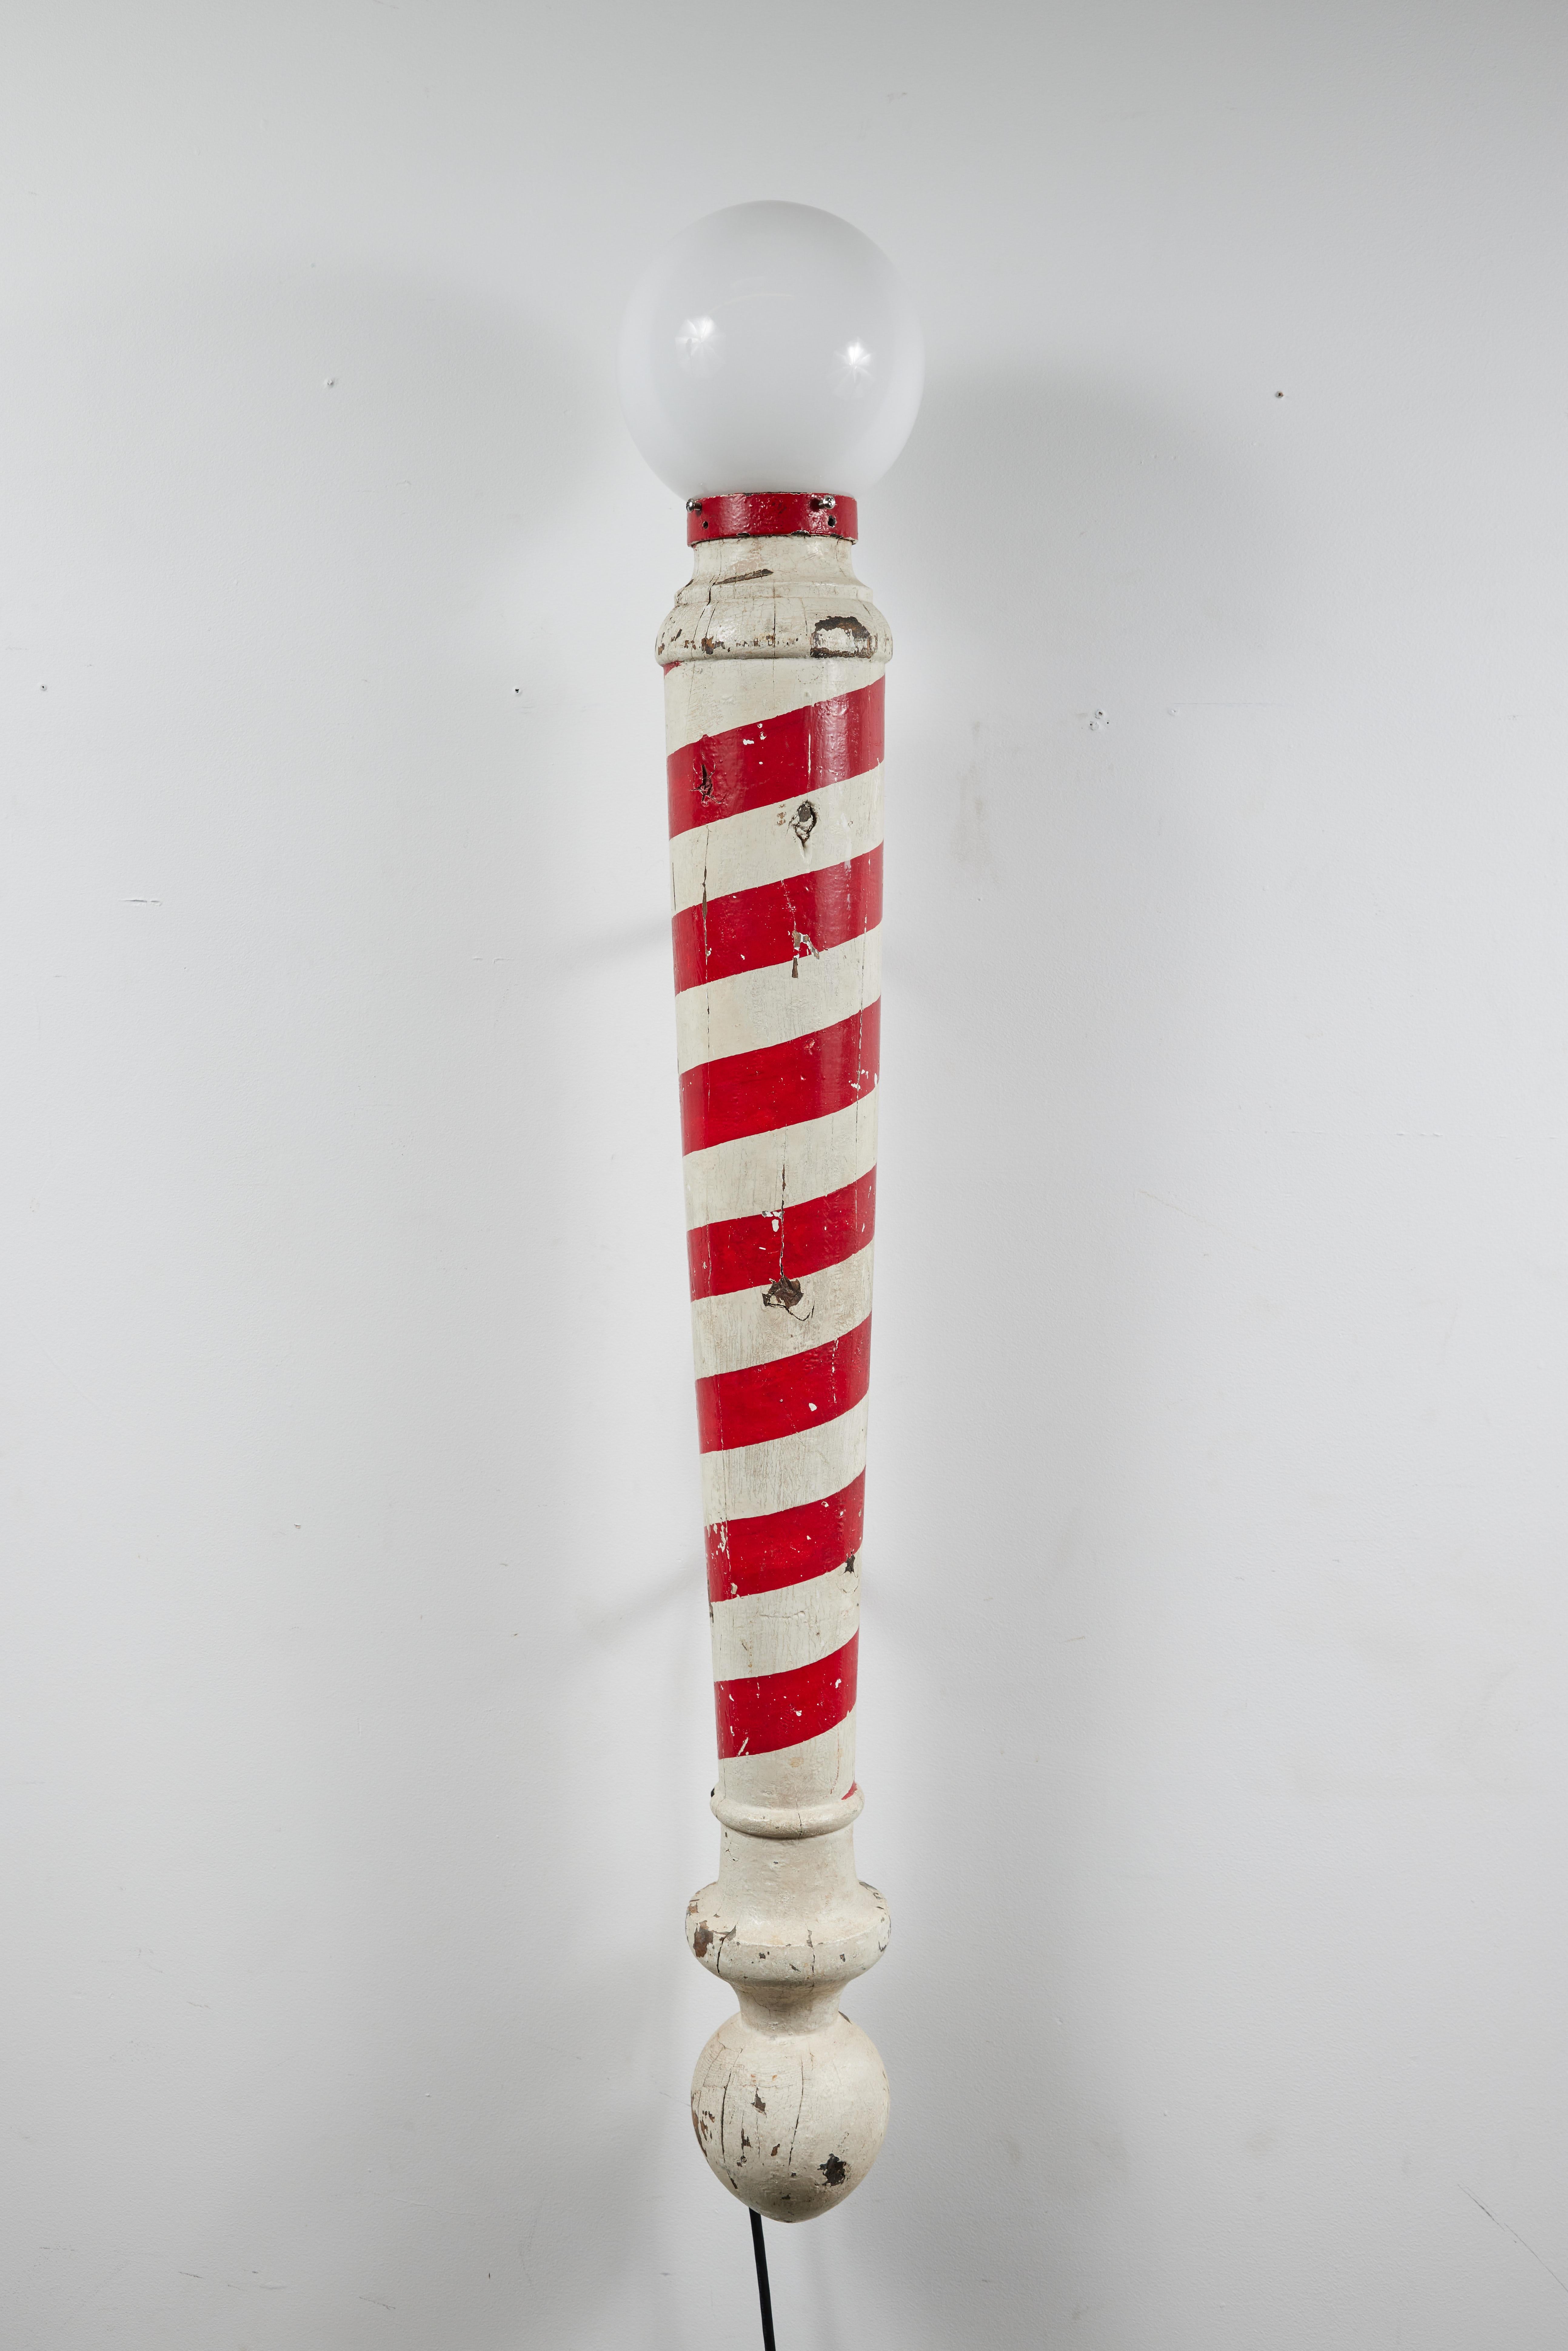 Wood Carved Red and White American Folk Art Barber Pole Trade Sign Sconce, C1920 For Sale 5